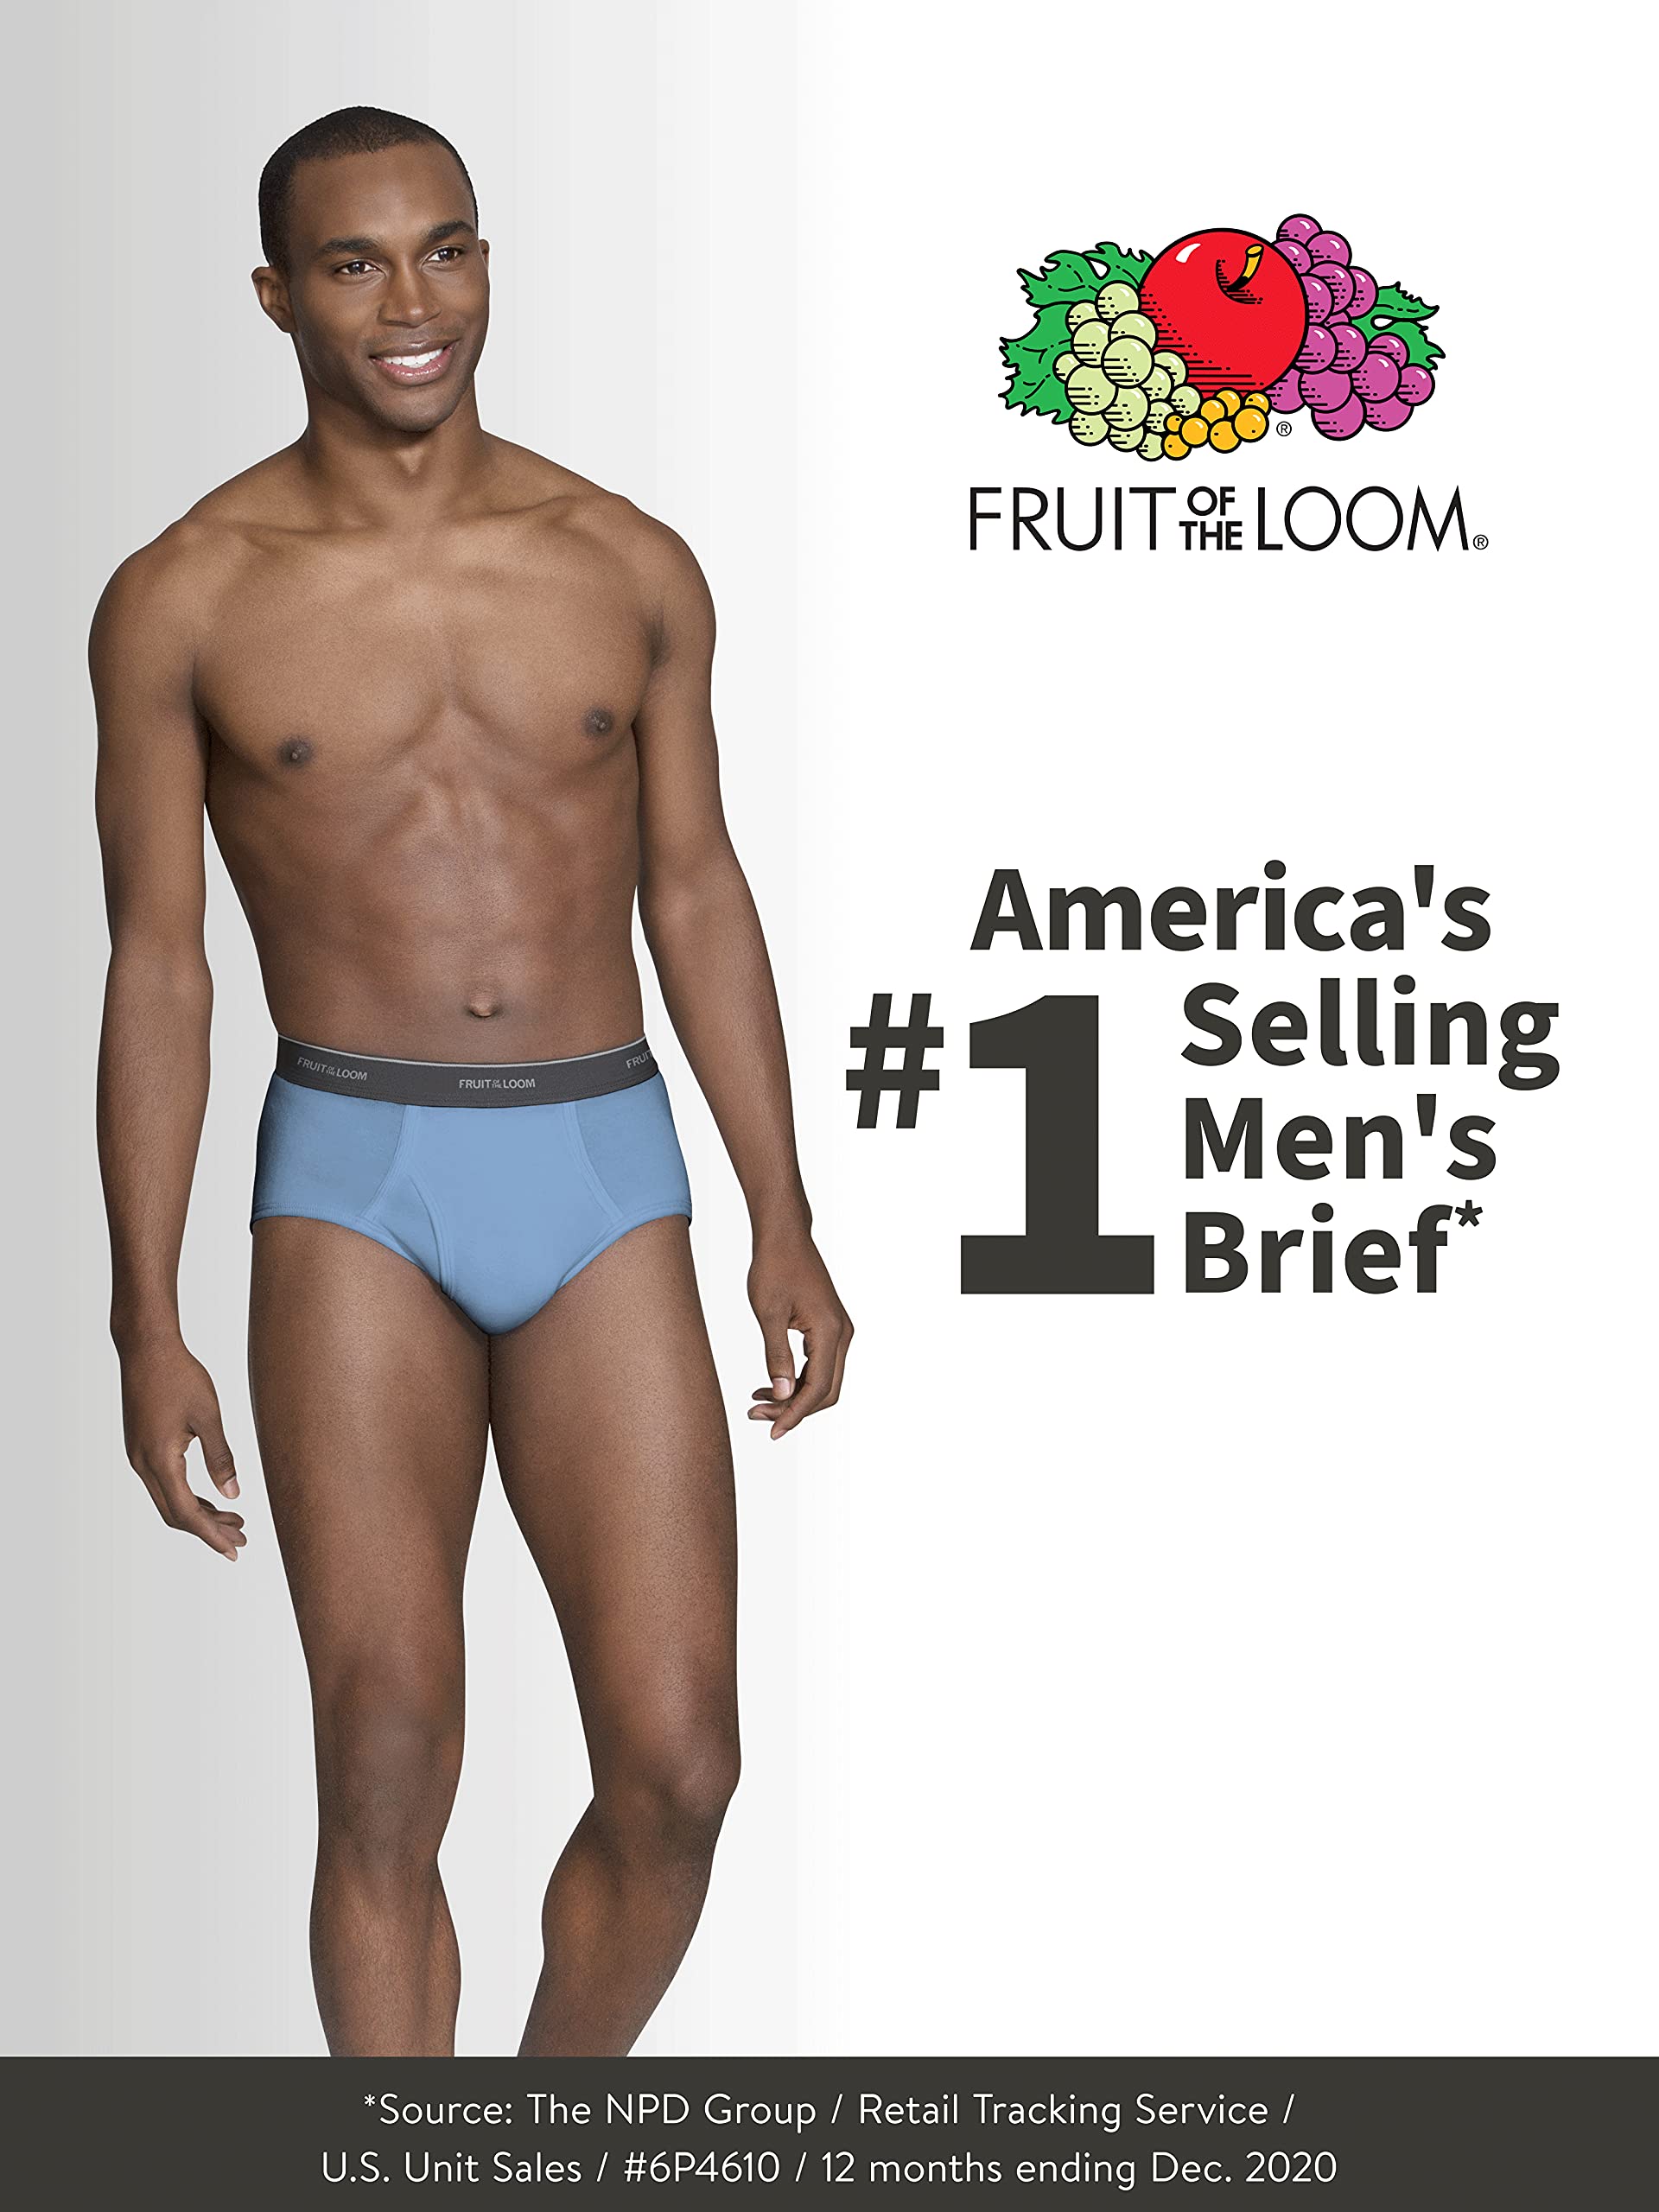 Fruit of the Loom Men's Tag-Free Cotton Briefs